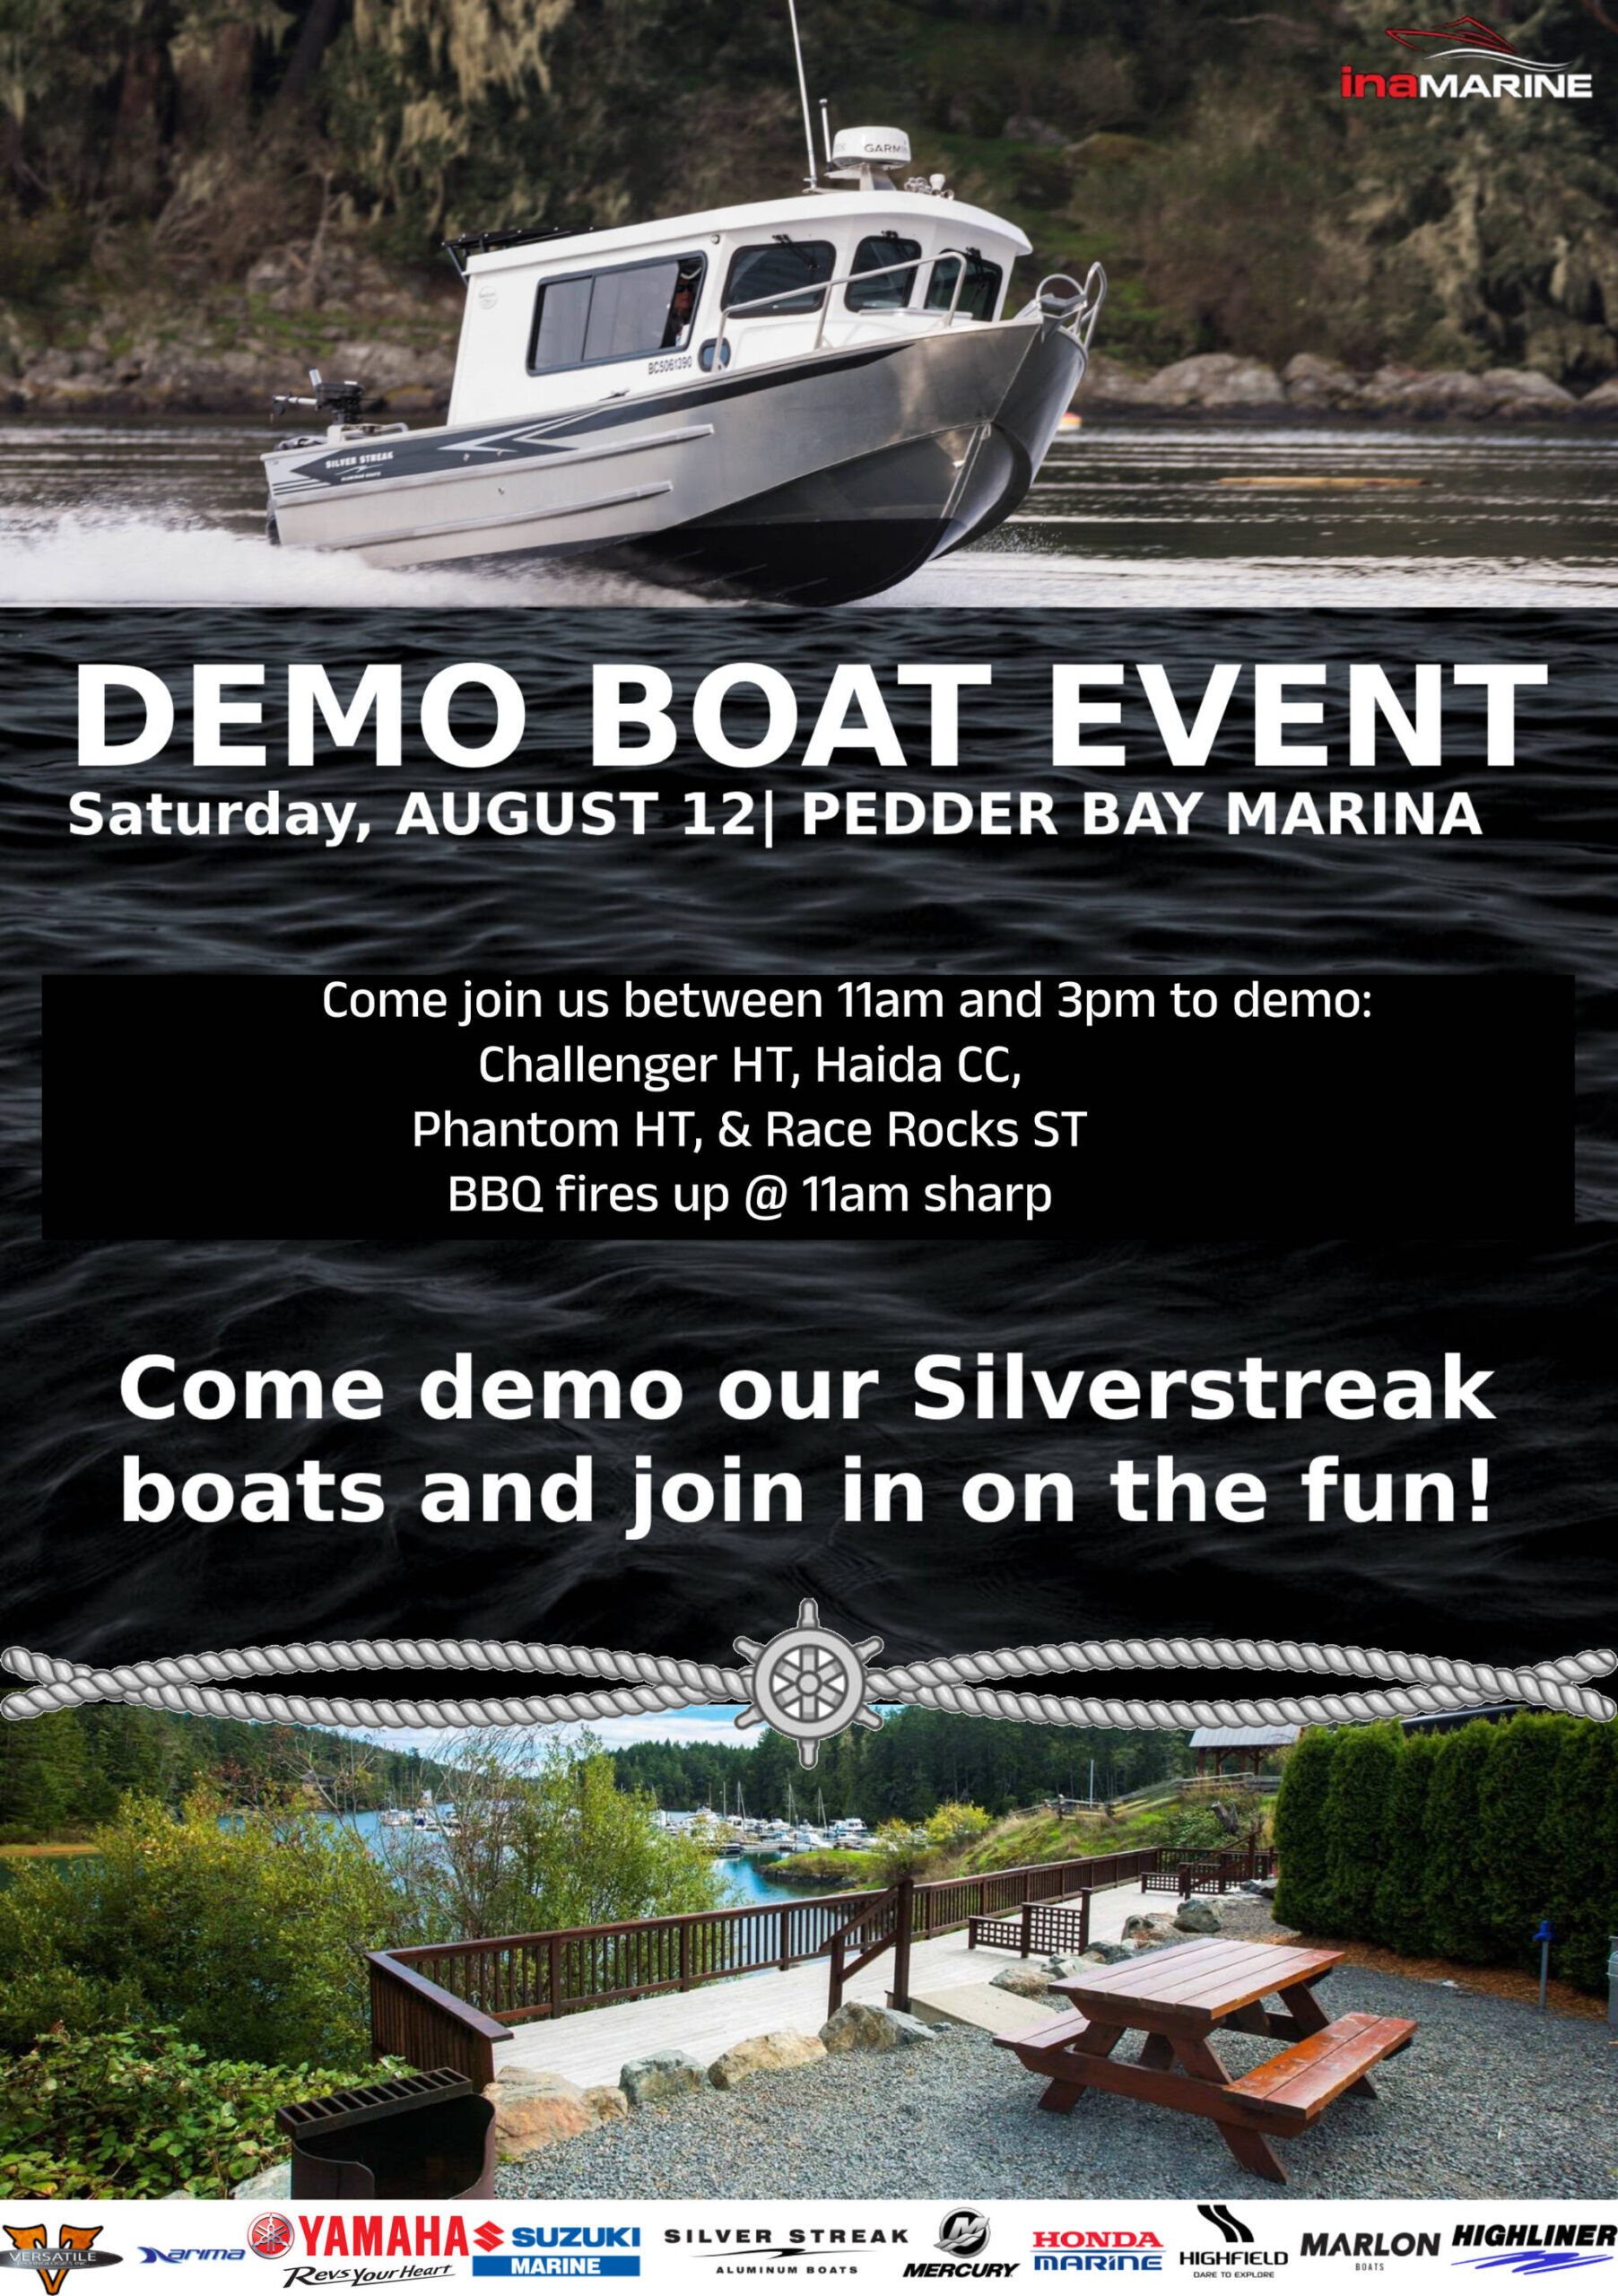 Join the Ina Marine team at their special Demo Boat Day Event!